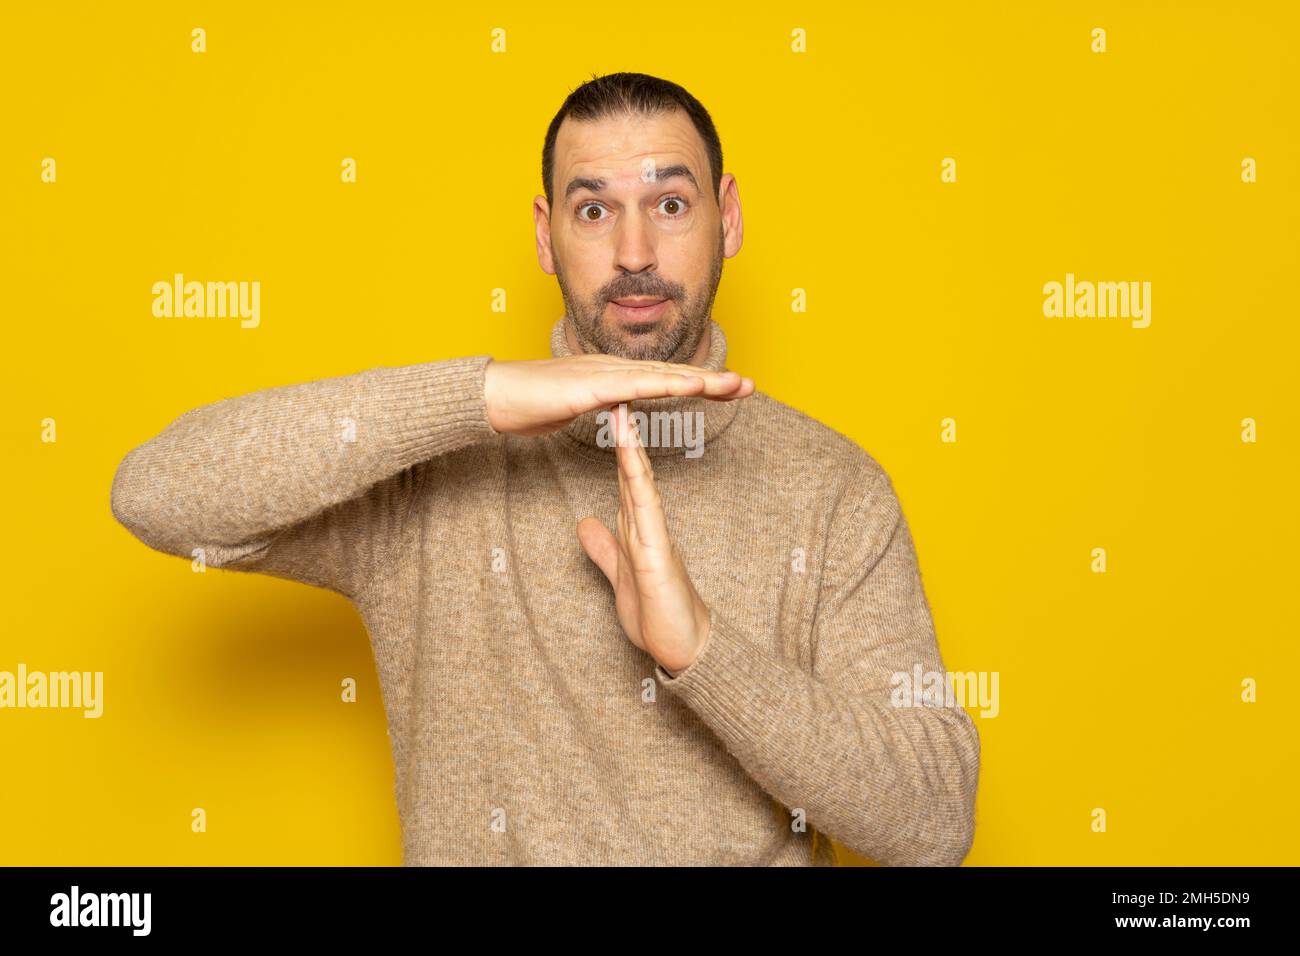 Bearded hispanic man wearing a turtleneck sweater showing time out gesture, tired of a lot of work. Indoor studio shot isolated on yellow background. Stock Photo